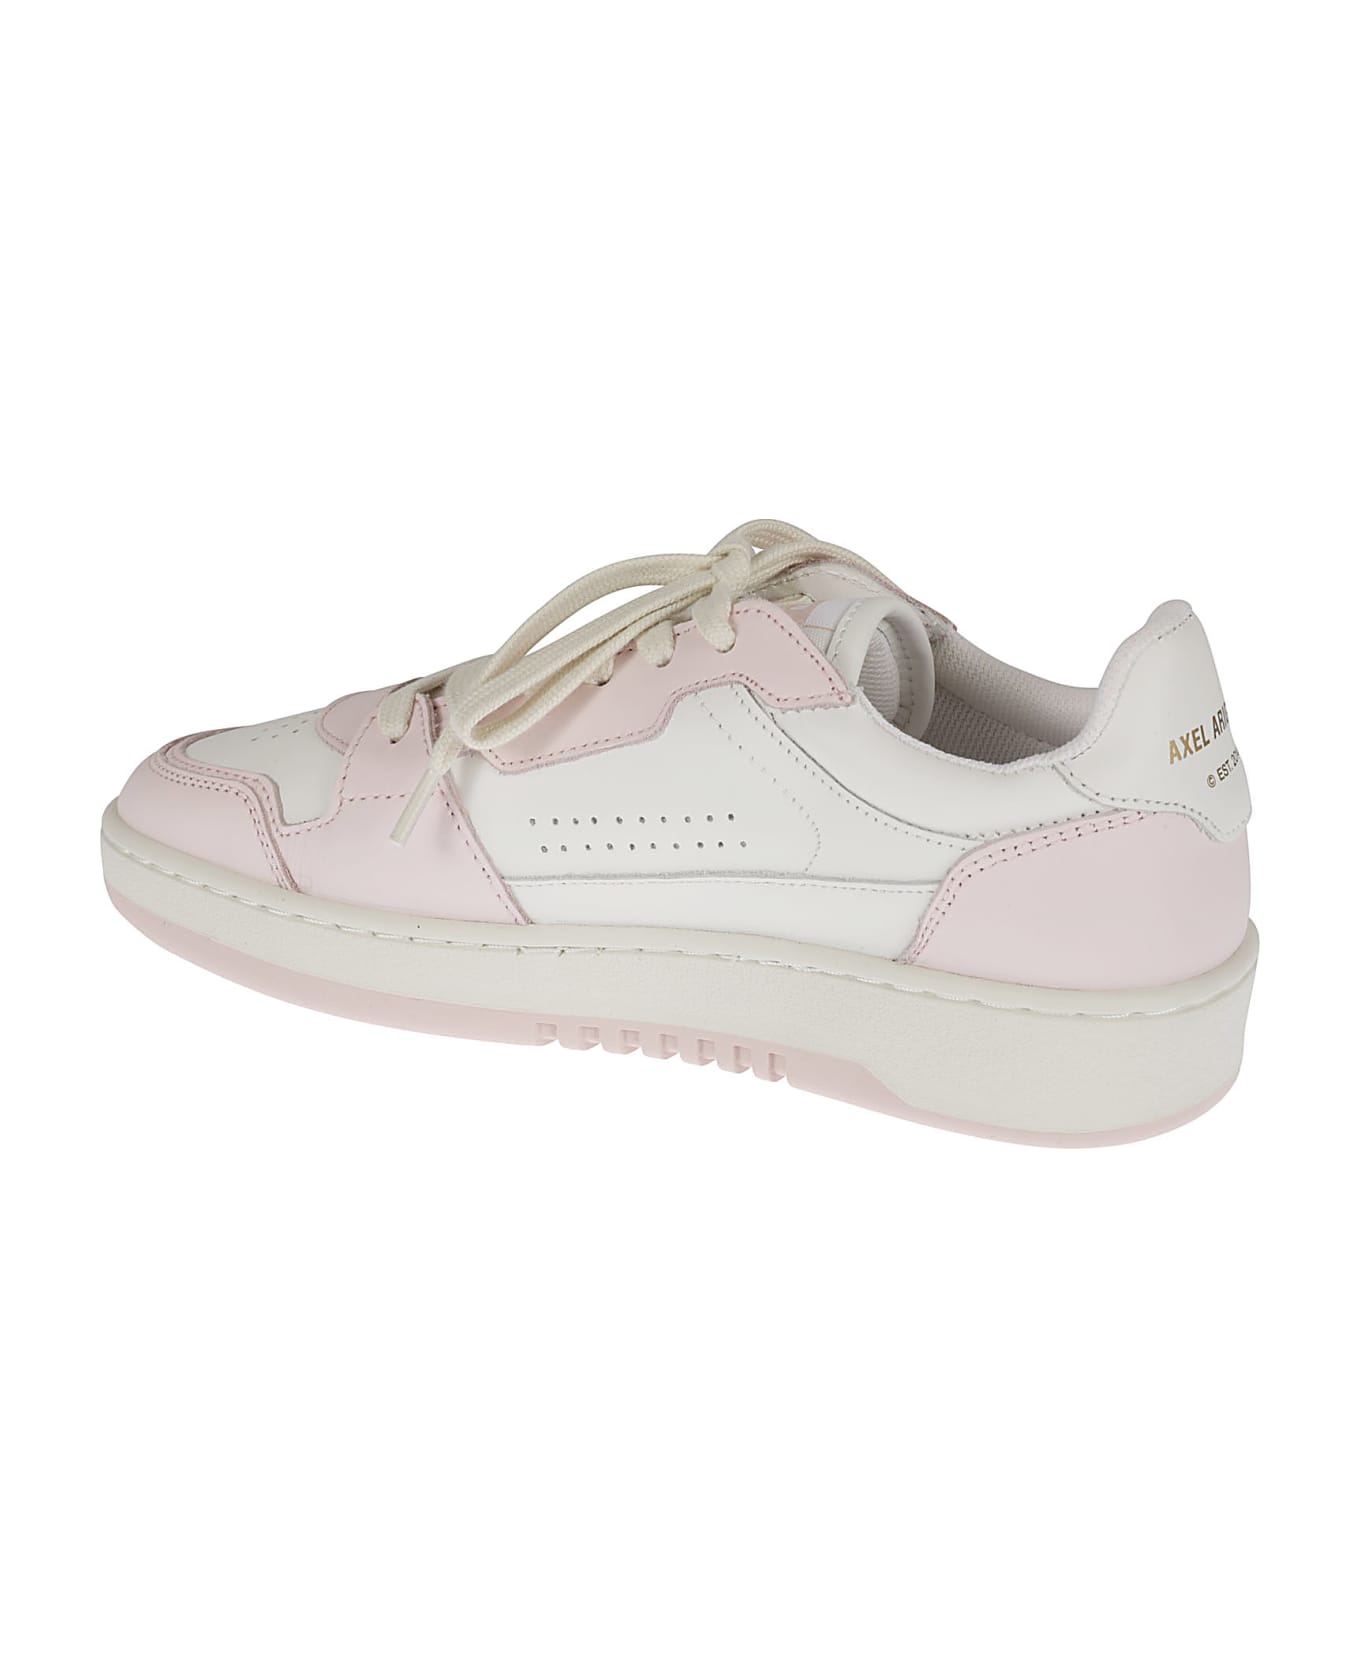 Axel Arigato Dice Lo Sneakers - White/Pink